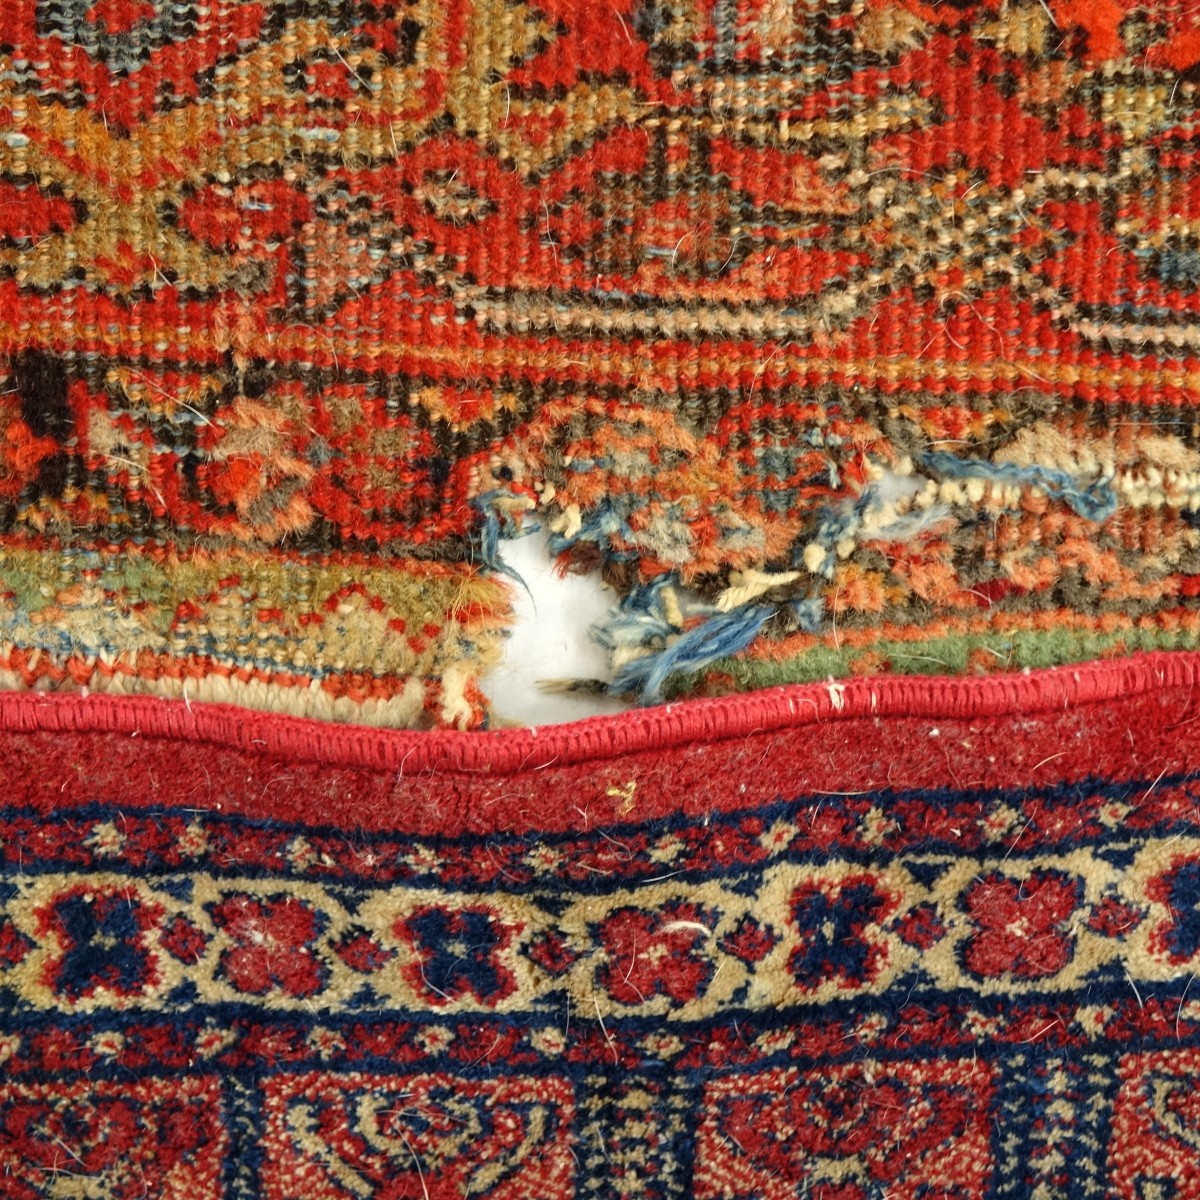 Two (2) Middle Eastern Rugs